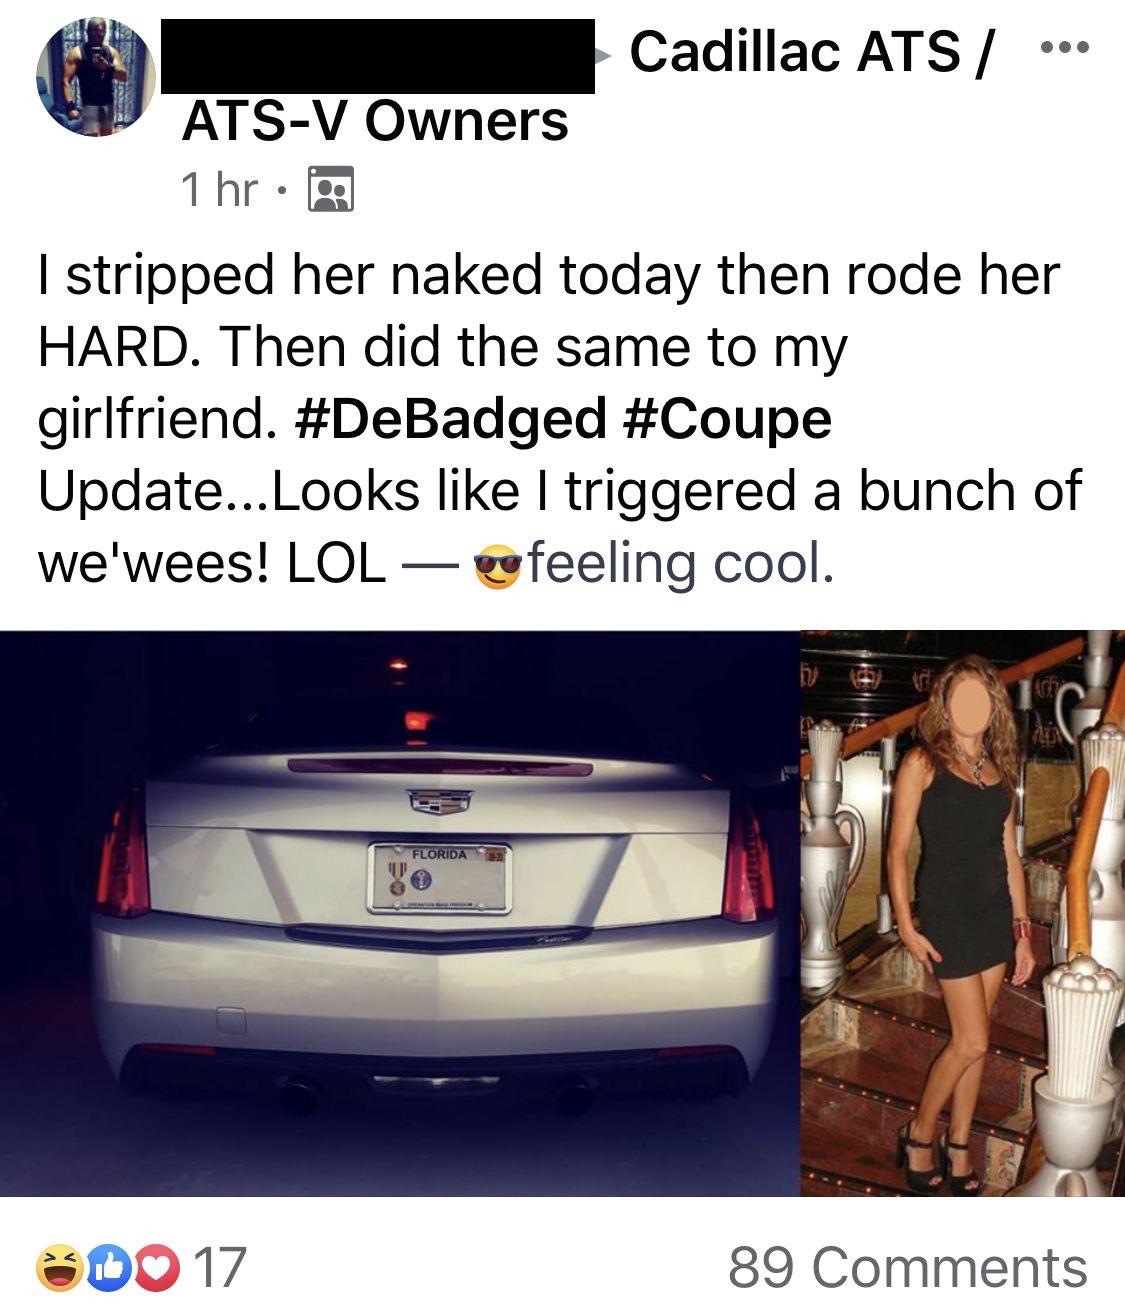 vehicle door - Cadillac Ats ... AtsV Owners 1 hr I stripped her naked today then rode her Hard. Then did the same to my girlfriend. Update... Looks I triggered a bunch of we'wees! Lol vefeeling cool. 5 c Florida Do 17 89